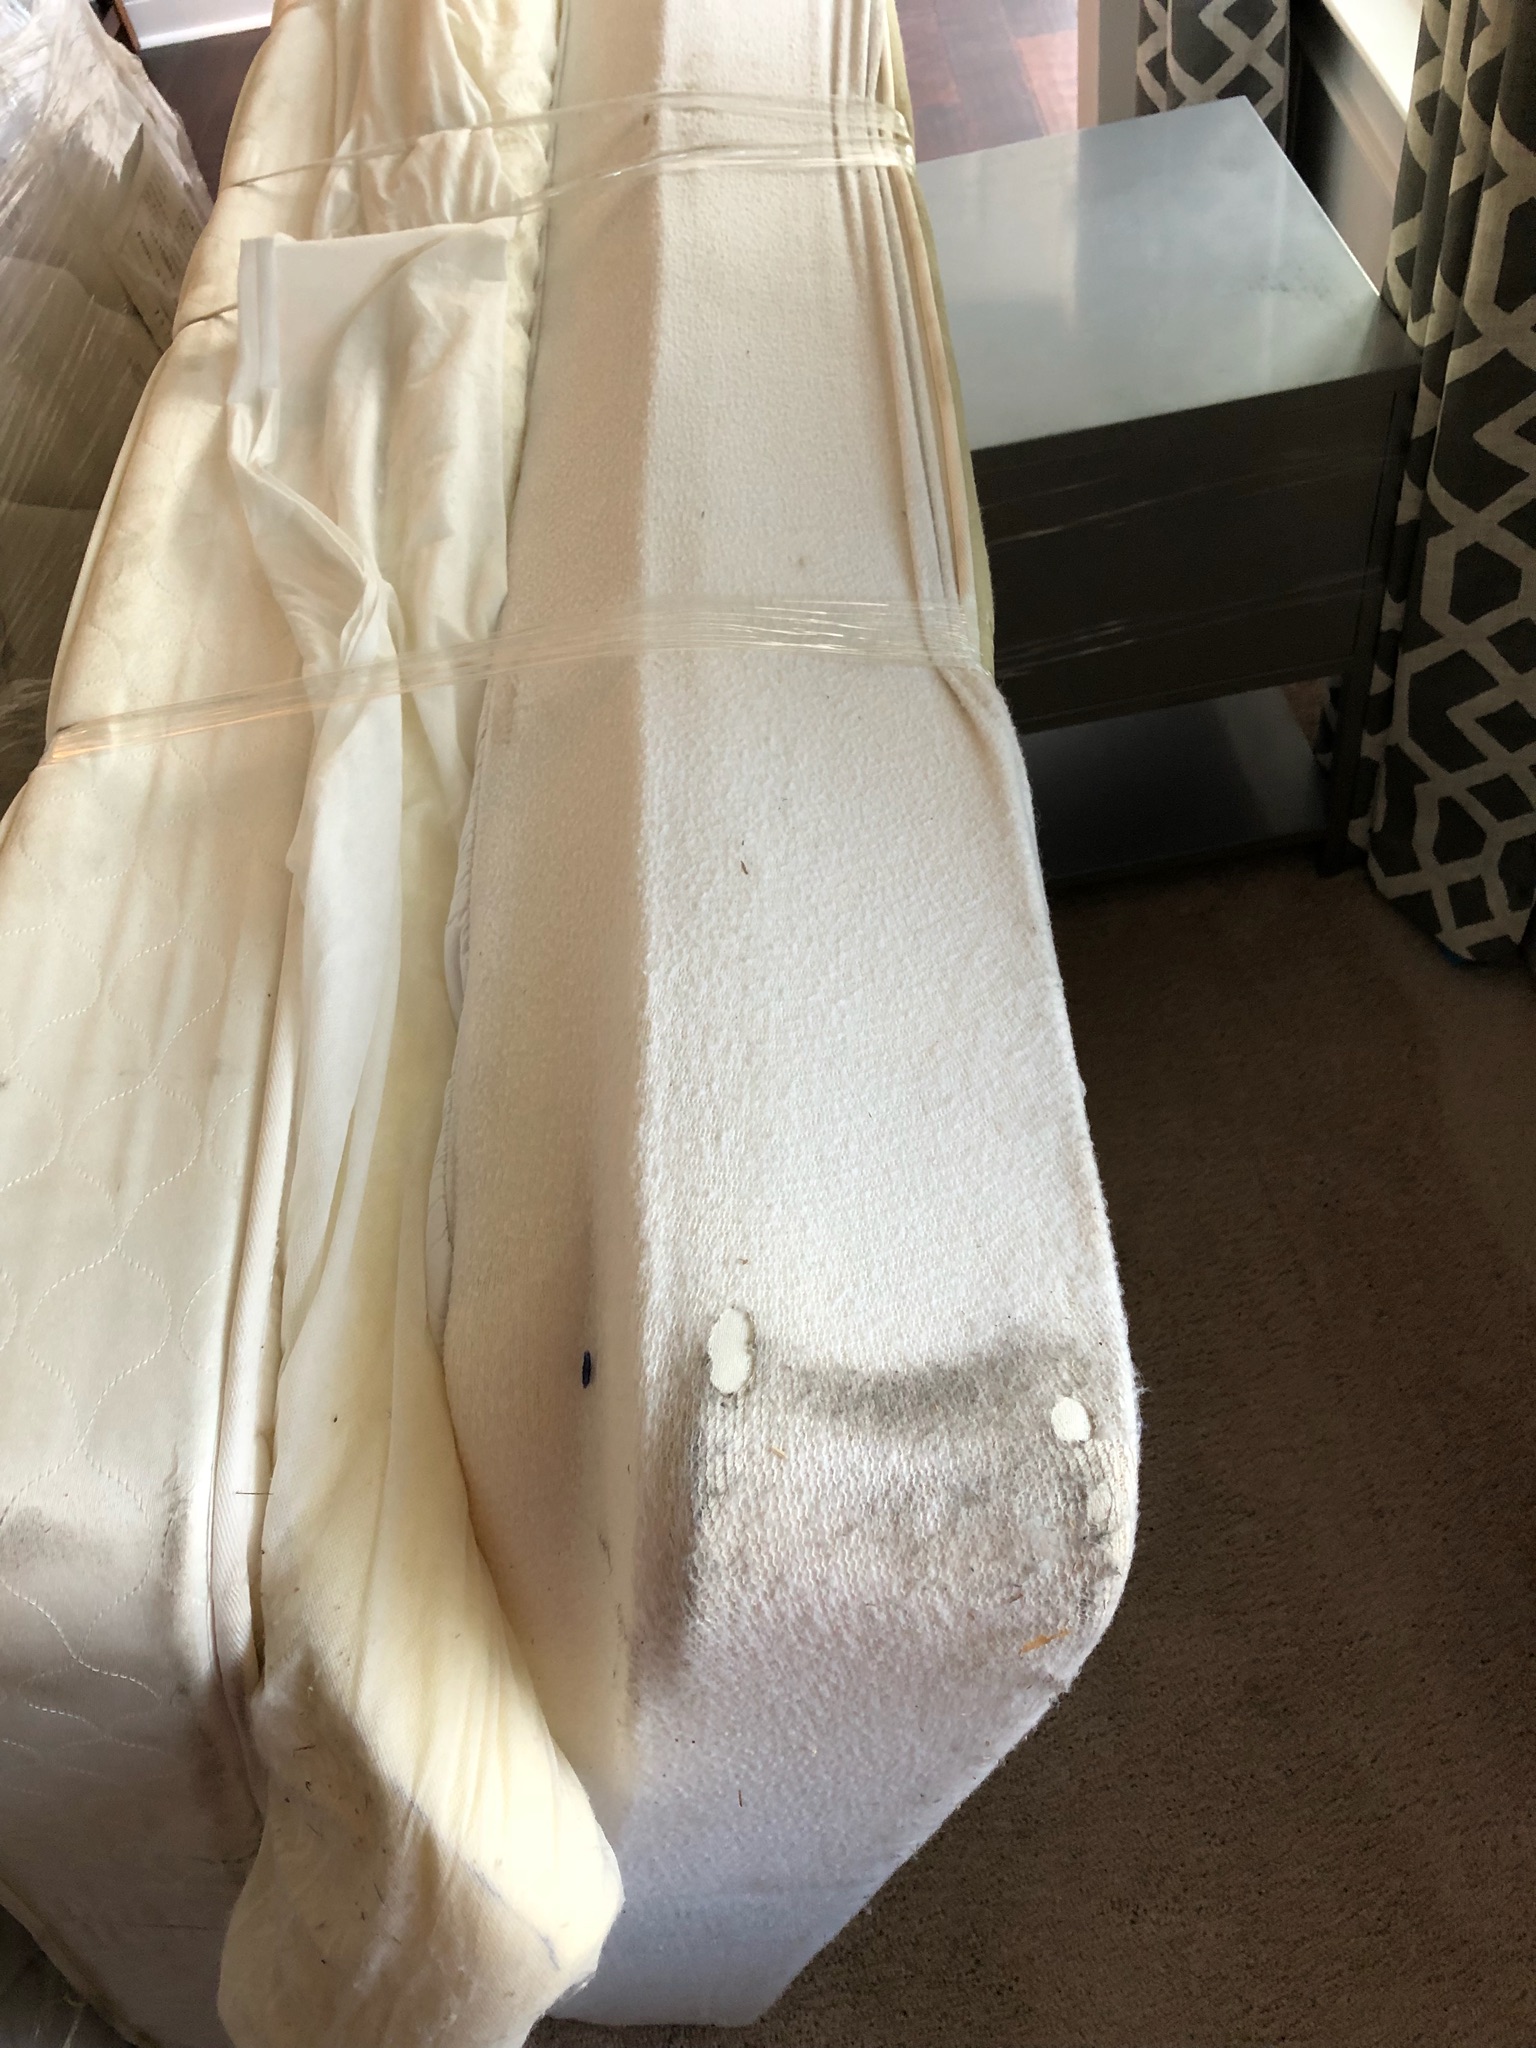 No wrap on any mattresses as promised